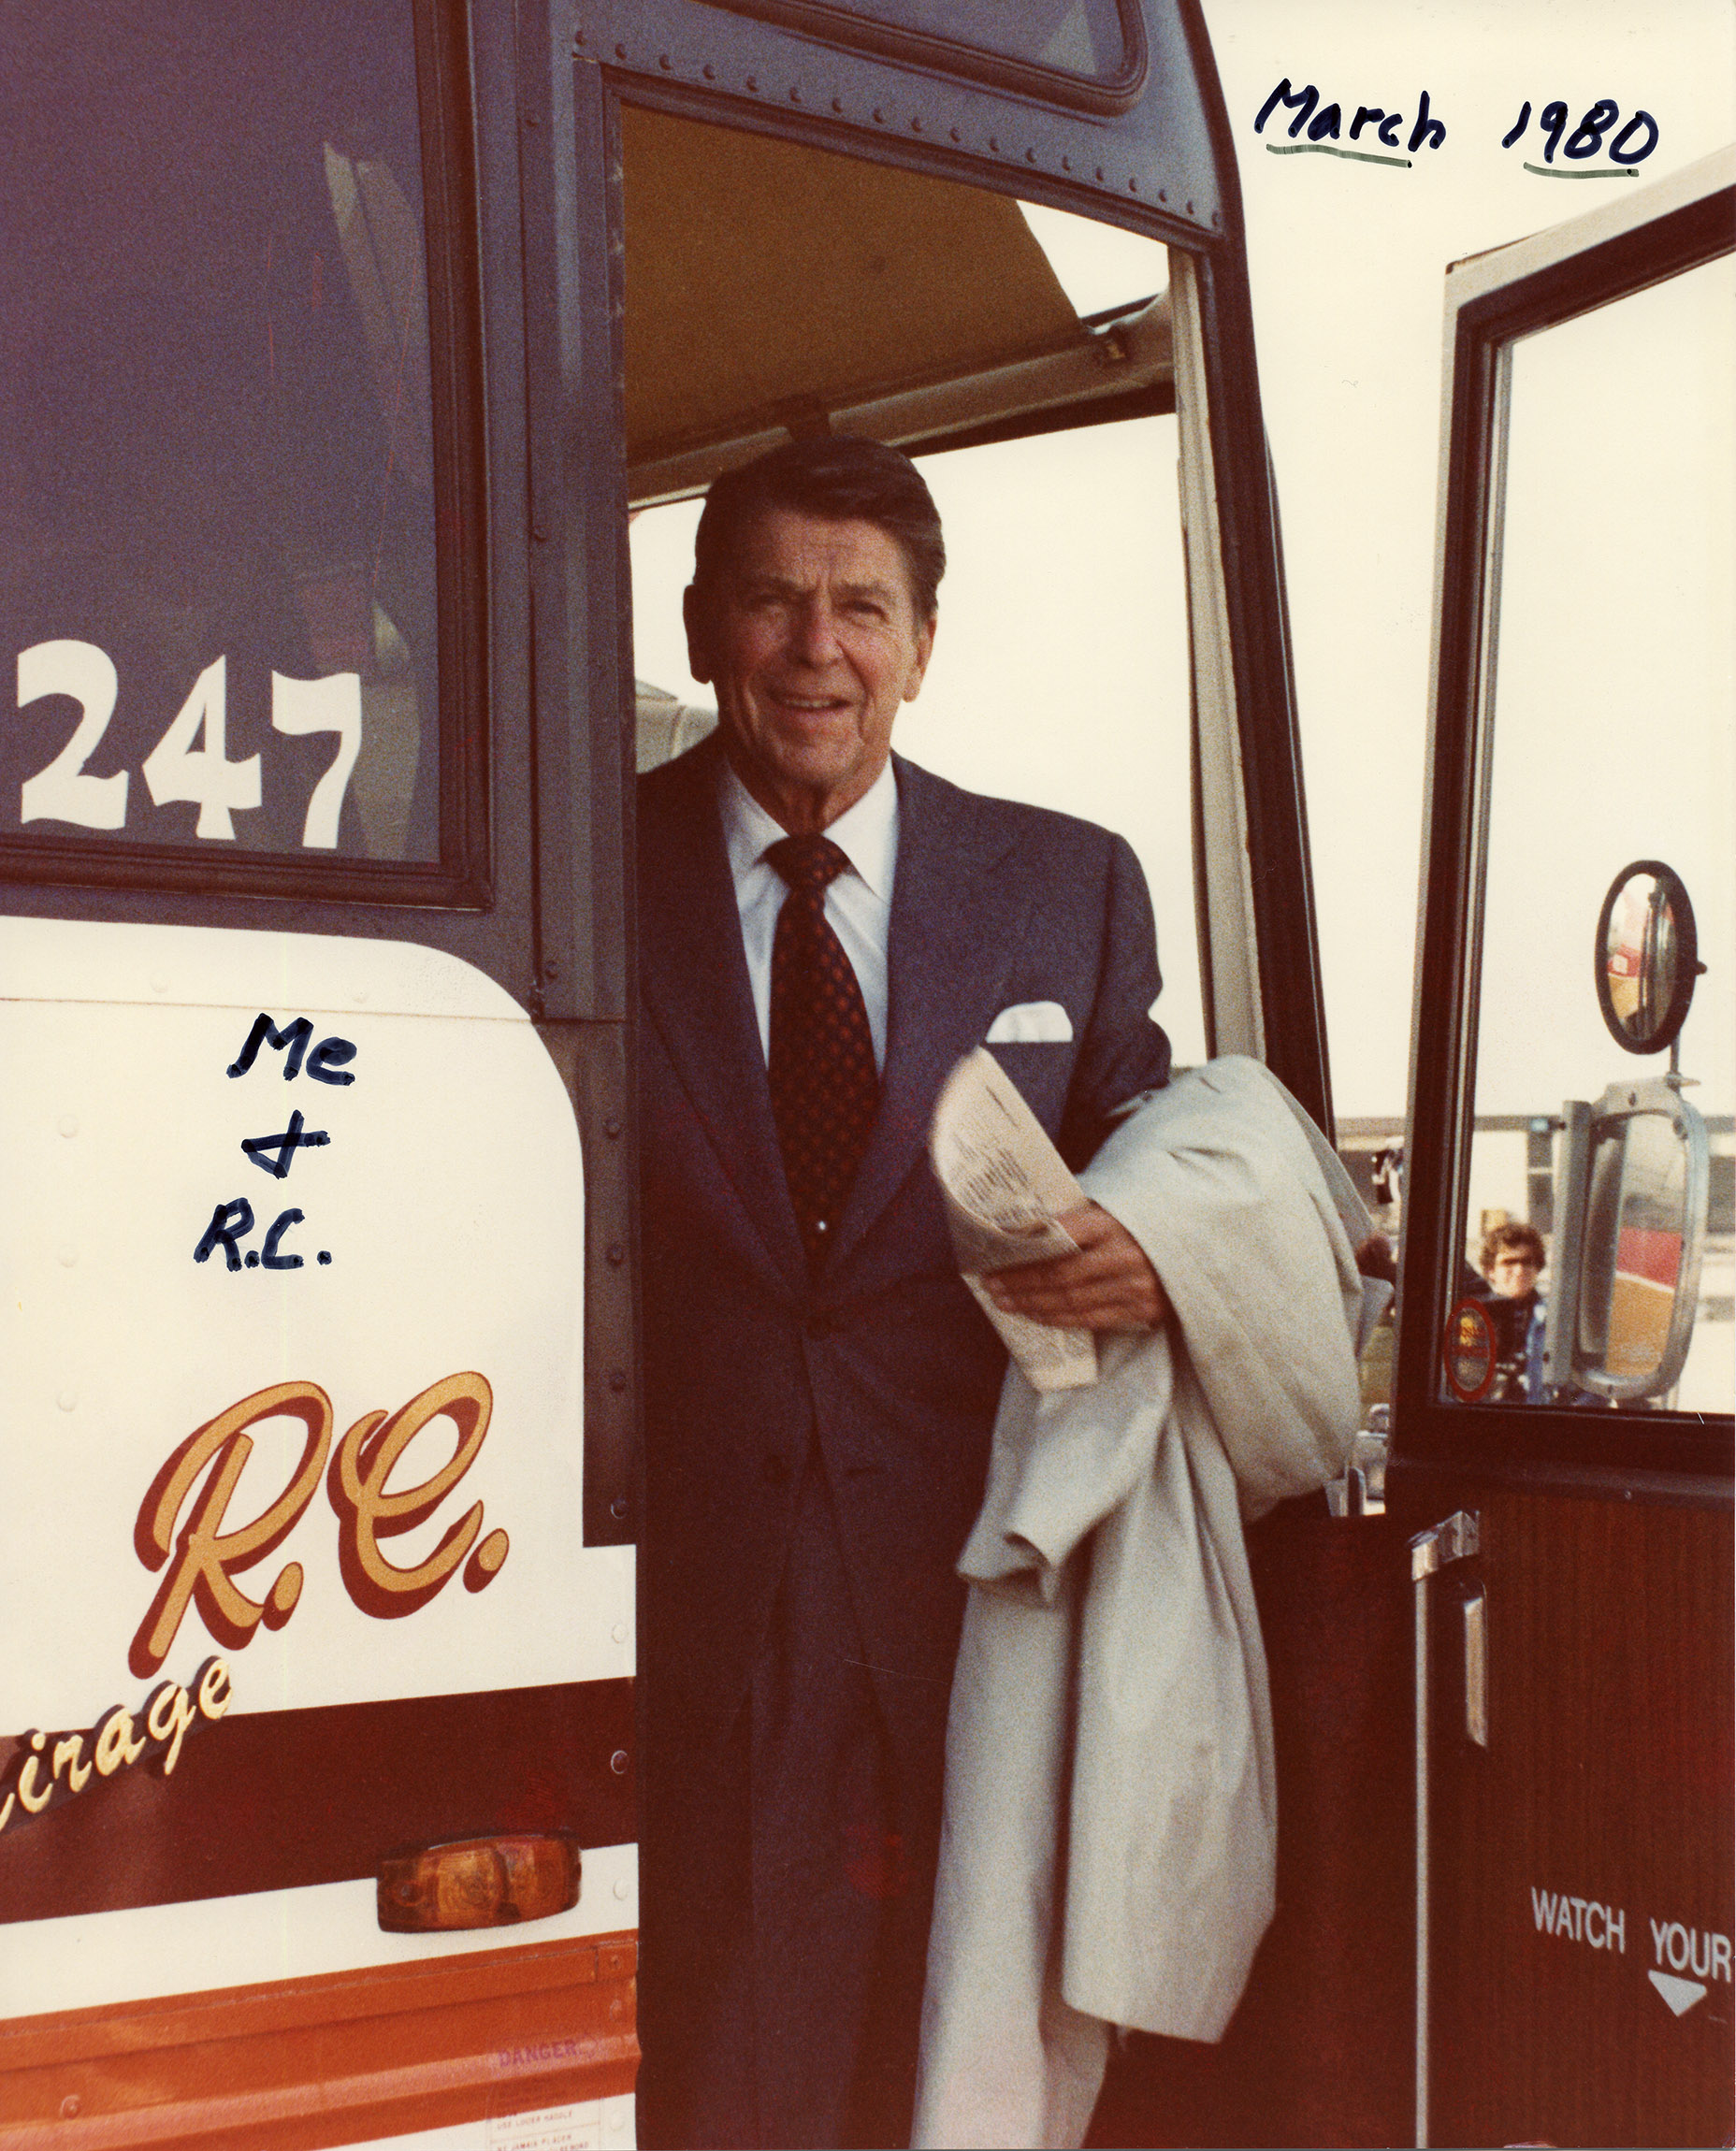 Ronald Reagan campaigning on bus